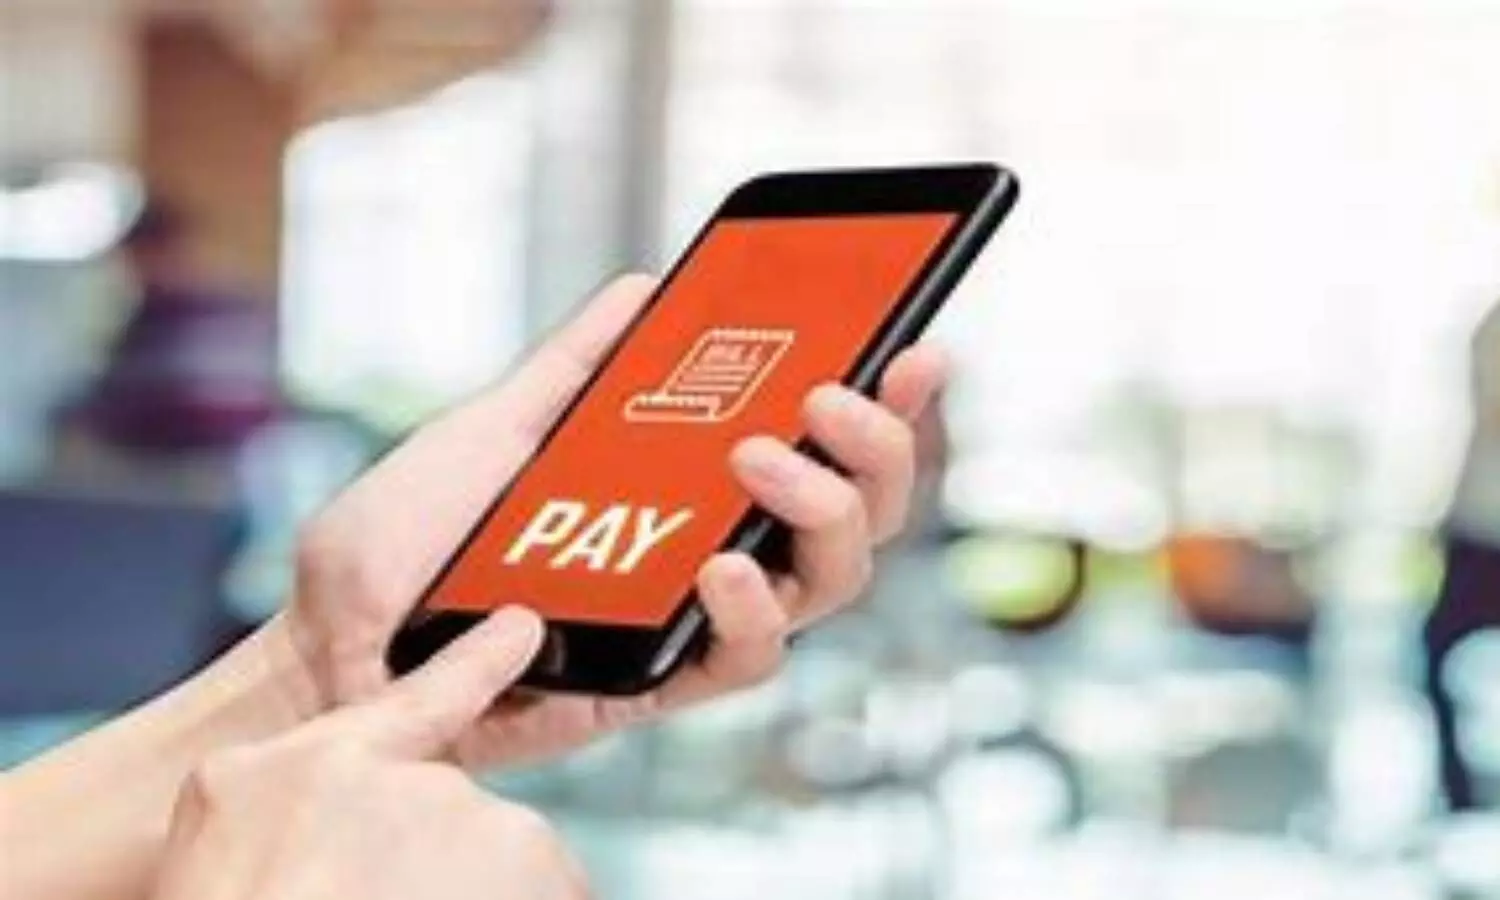 India’s digital payments market is at an all-time high